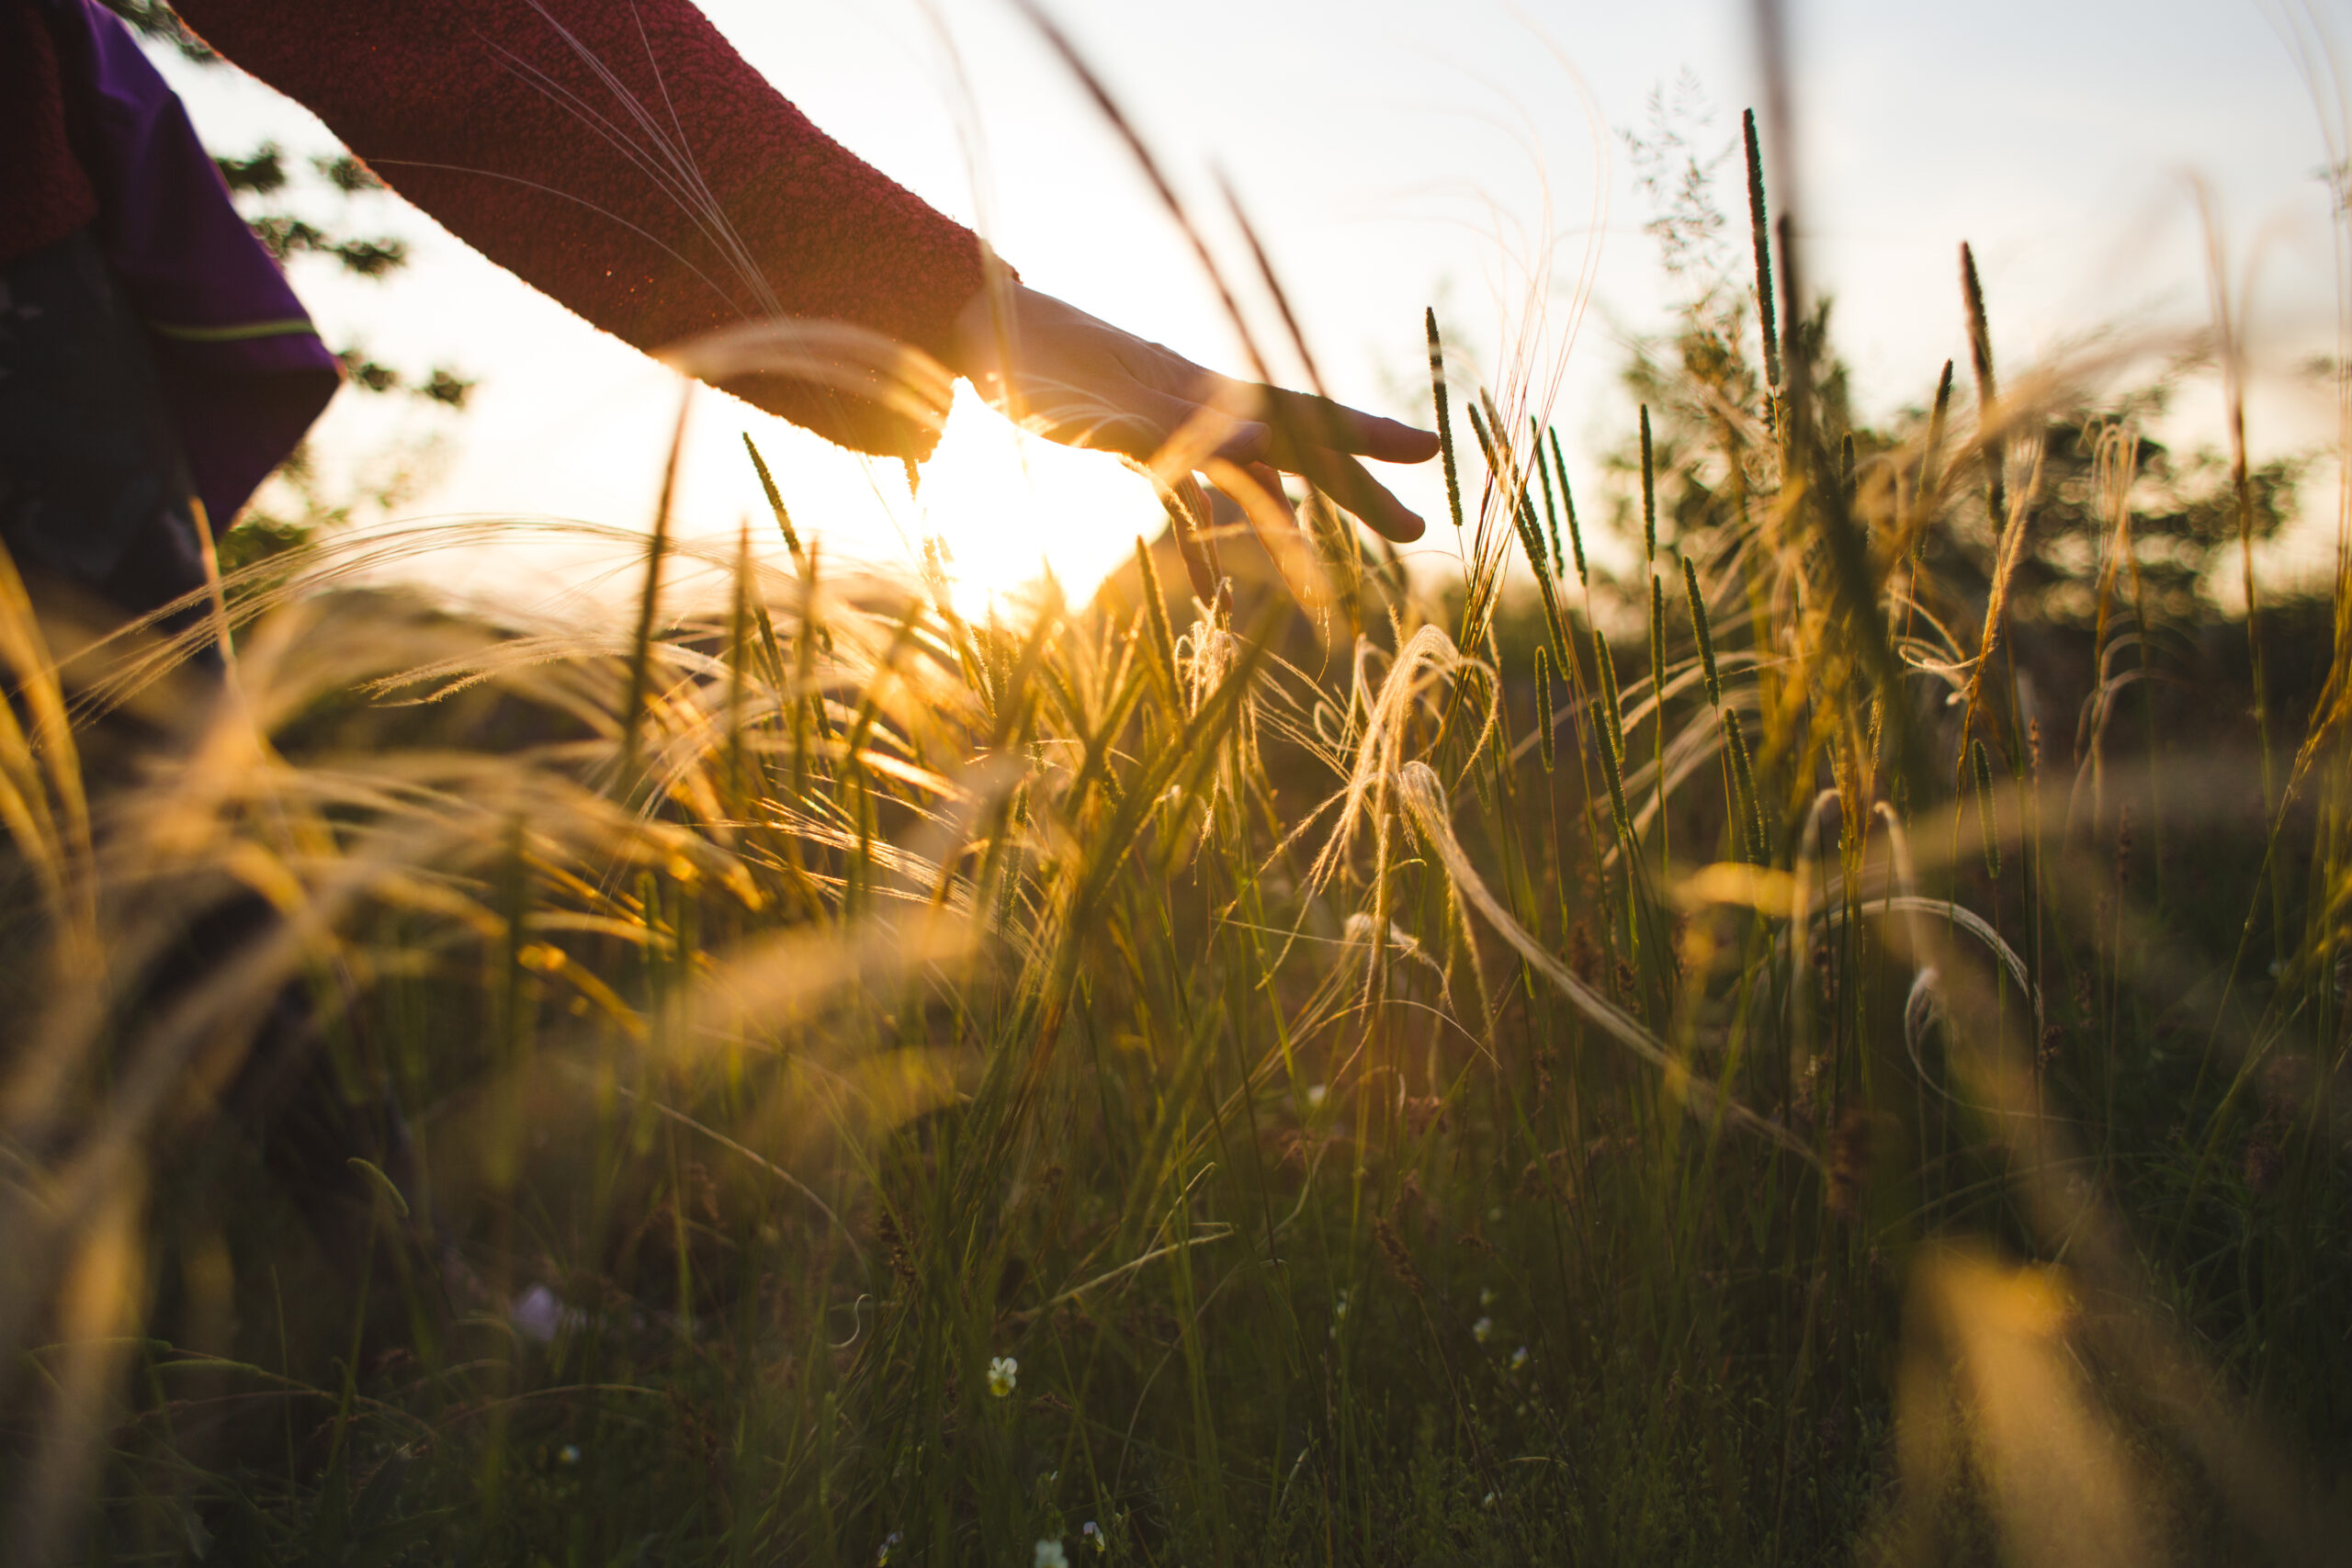 the girl runs her hand over the tall grass and touches it while walking through the fields in the sunset light.